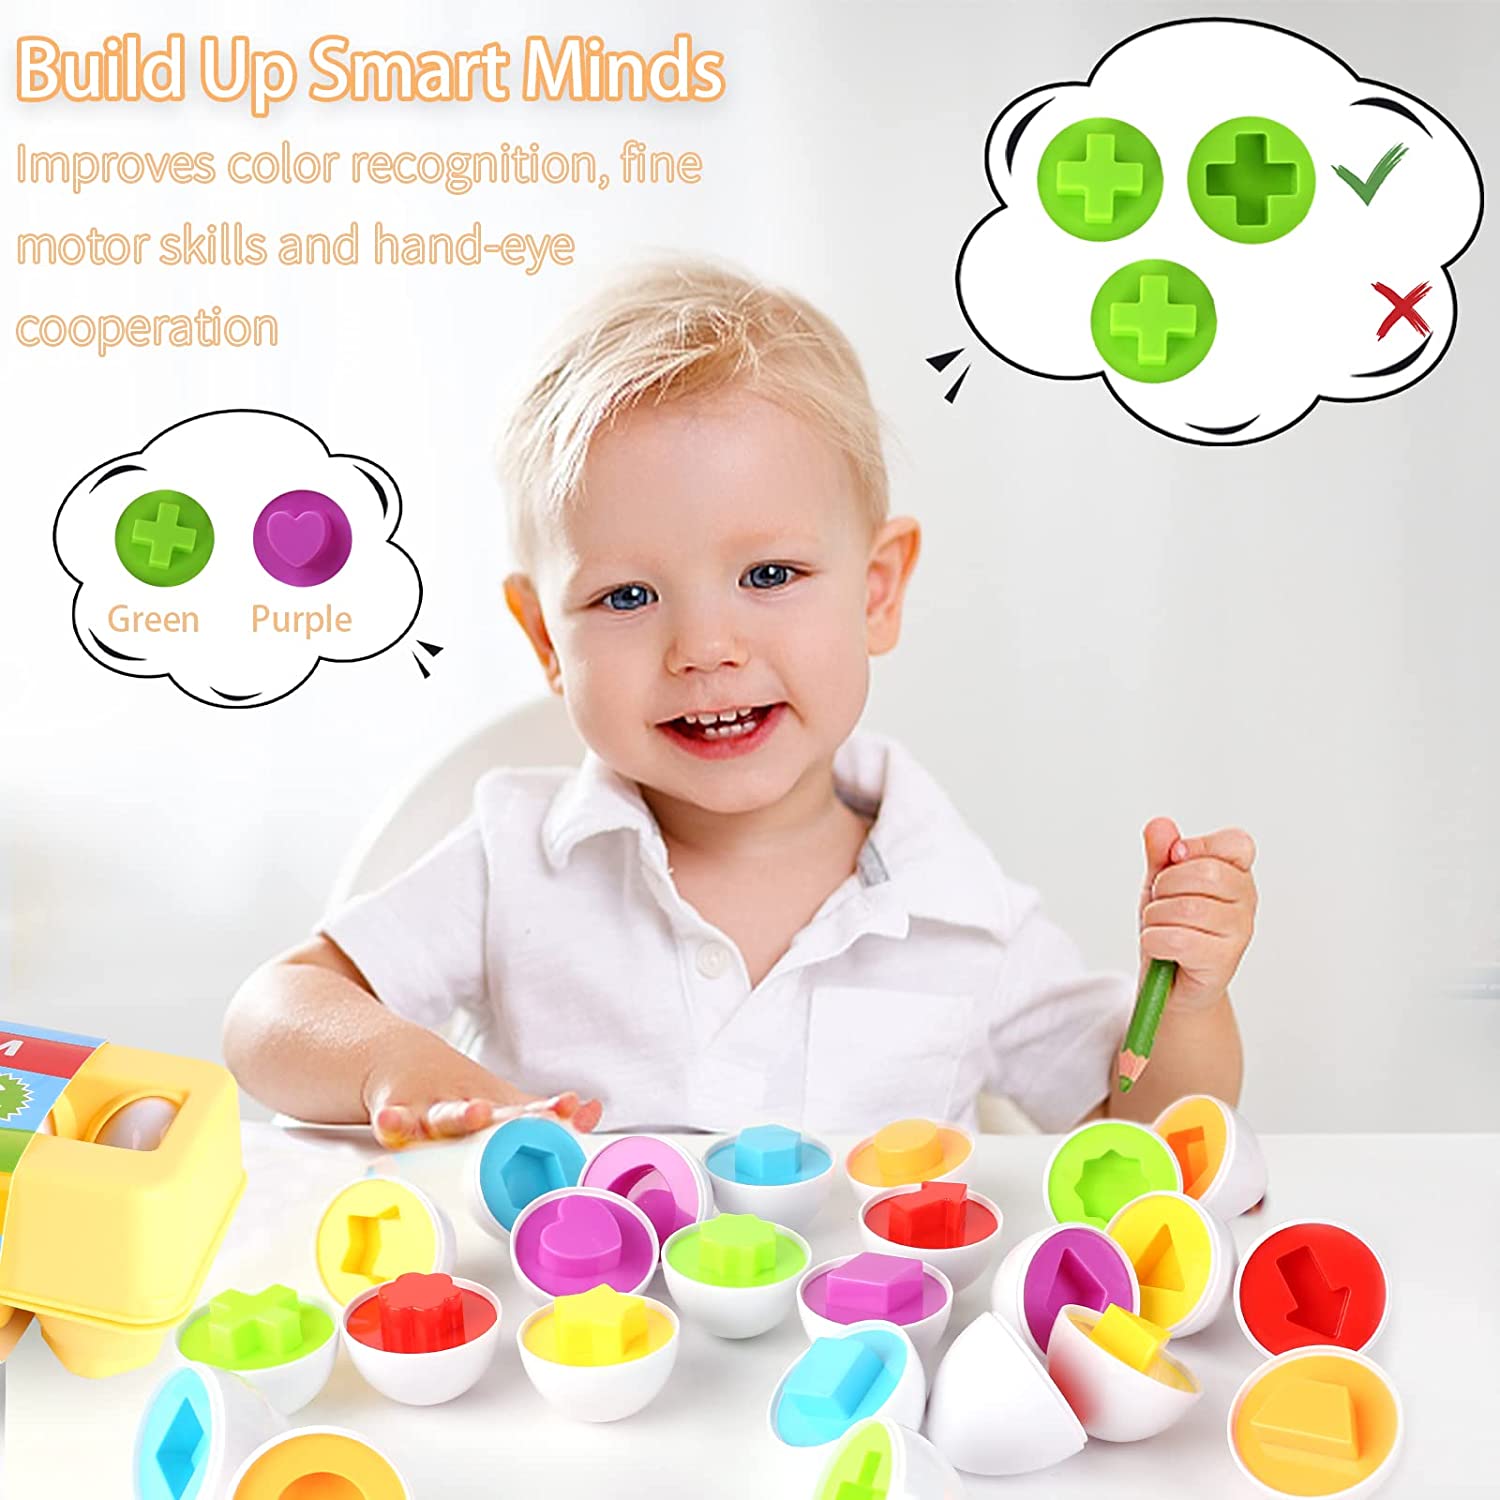 12PCS Montessori Education Early Learning Puzzle Geometric Shape Math Alphabet Game Baby Smart Plastic Material Egg Toys For Kid Kids toys DailyAlertDeals   